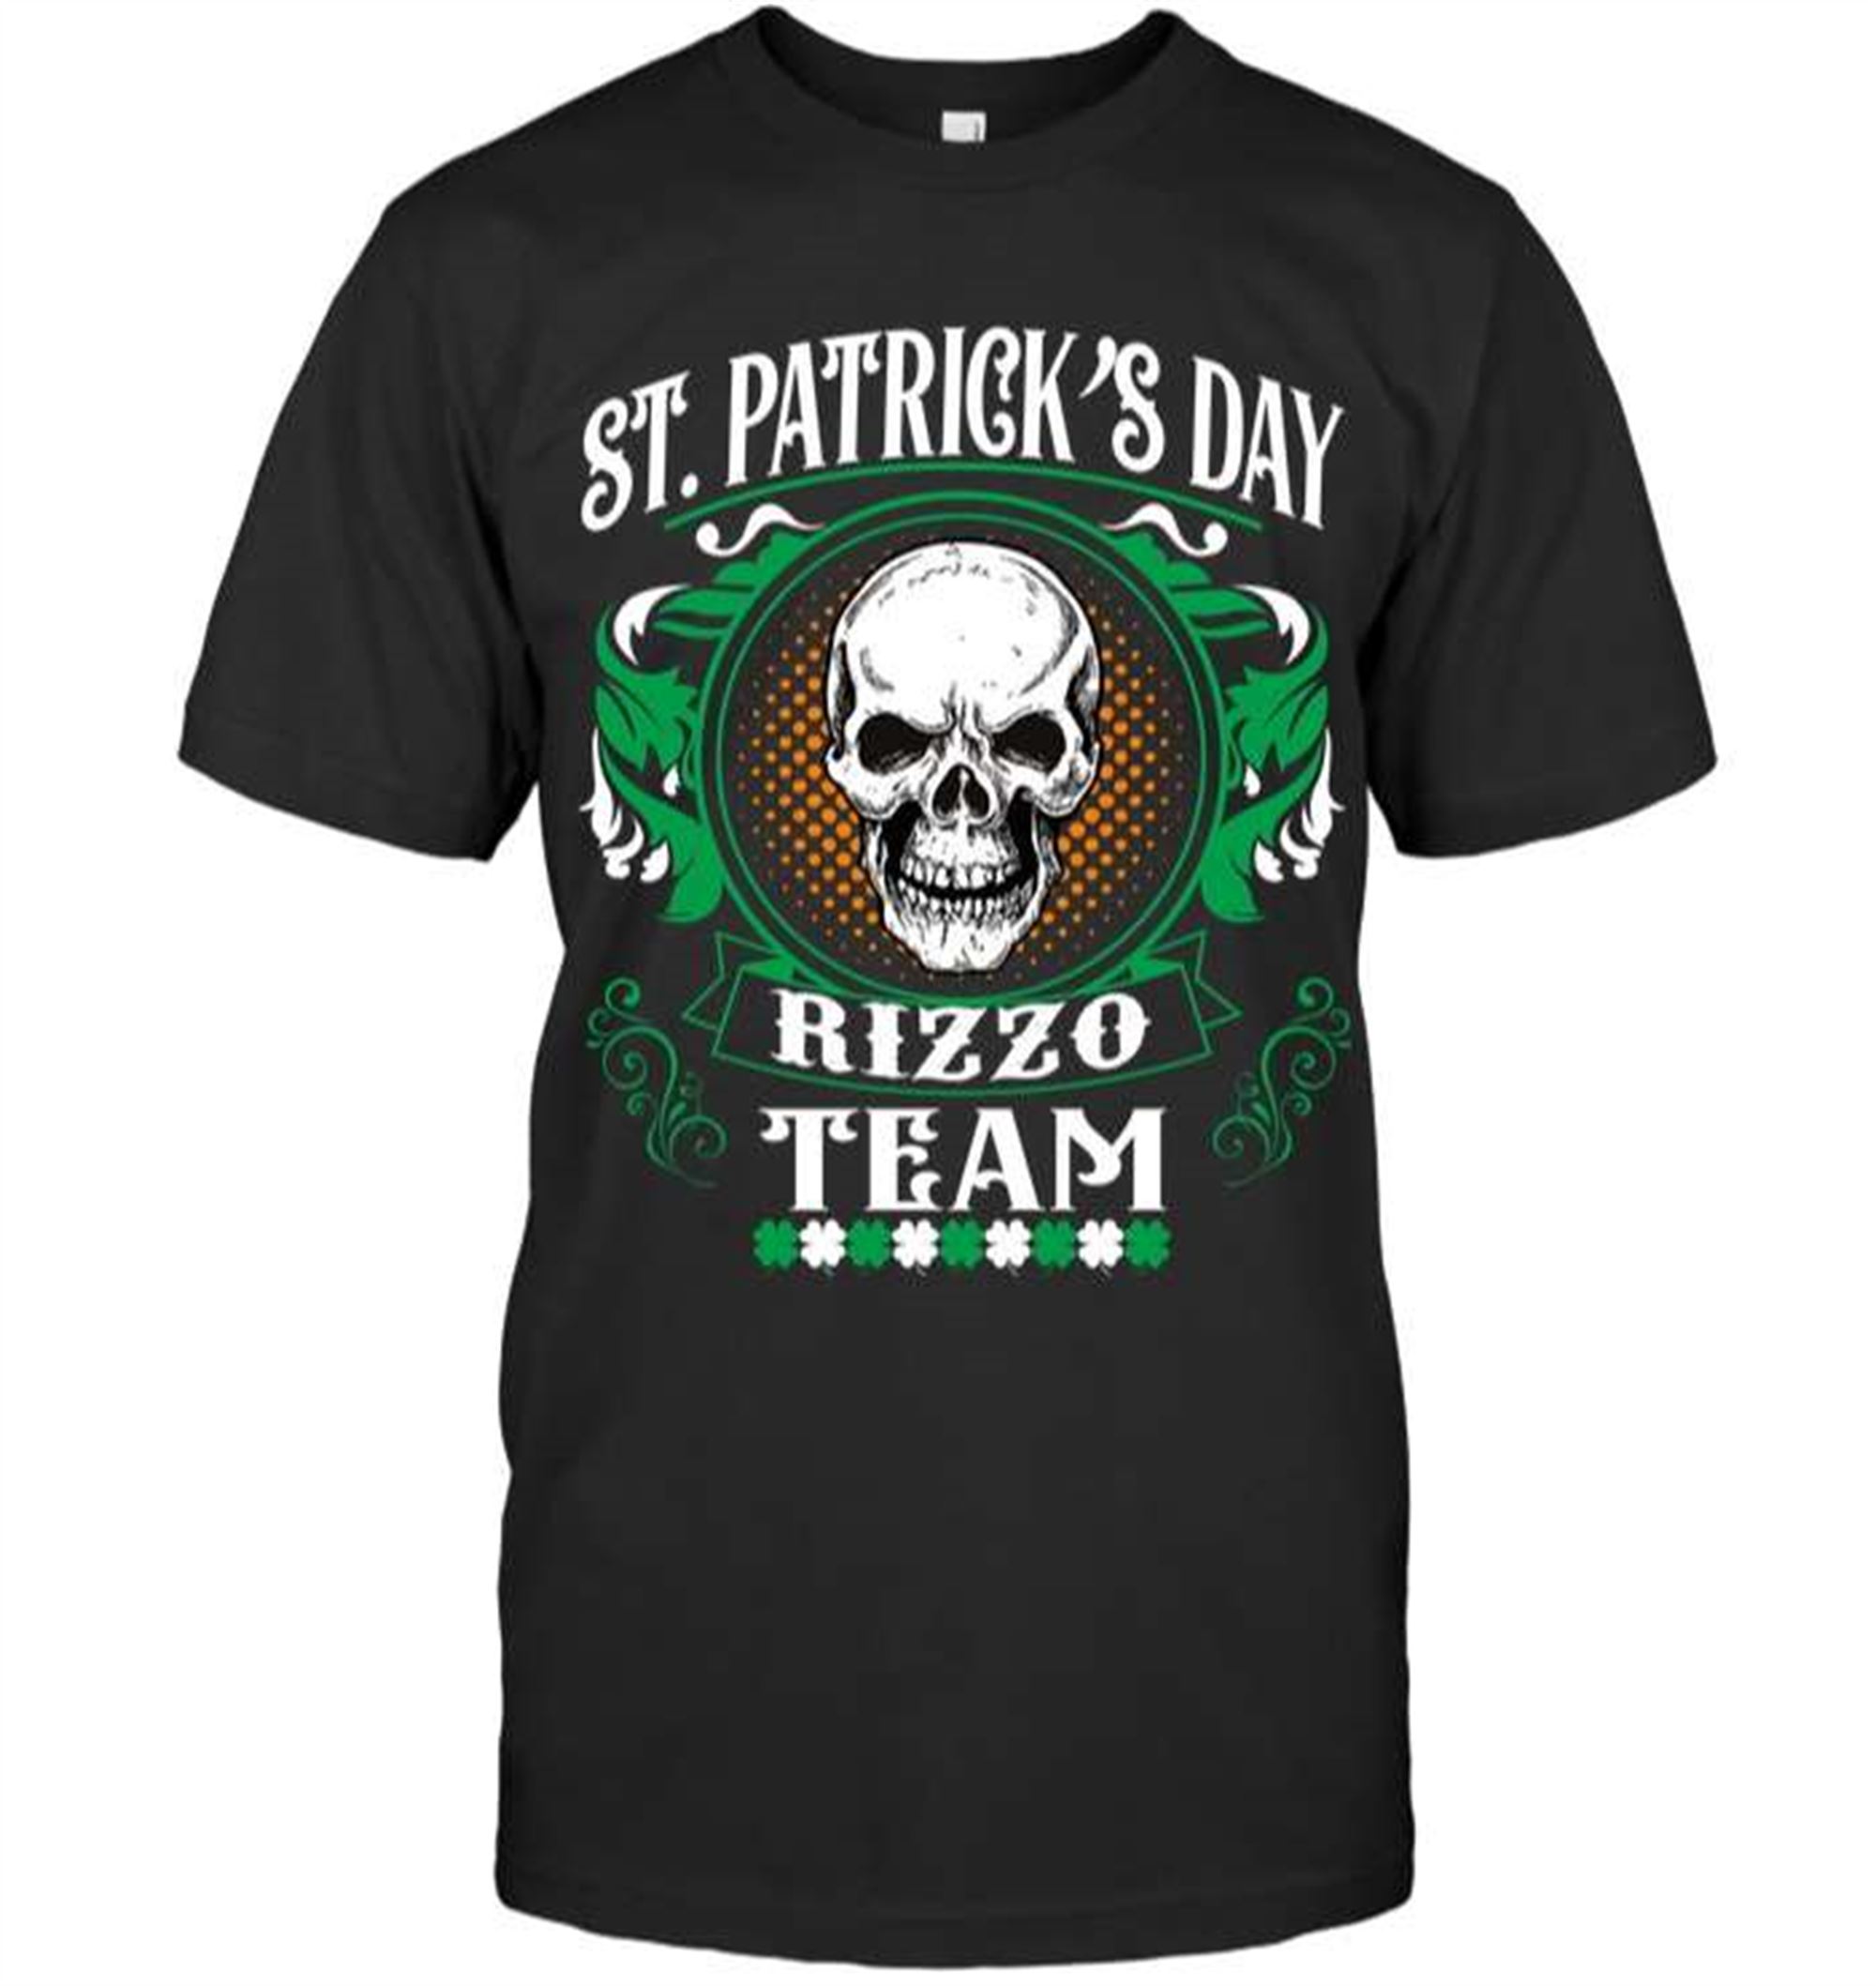 St Patrick Day Rizzo Team Classic Unisex T Shirt Size Up To 5xl